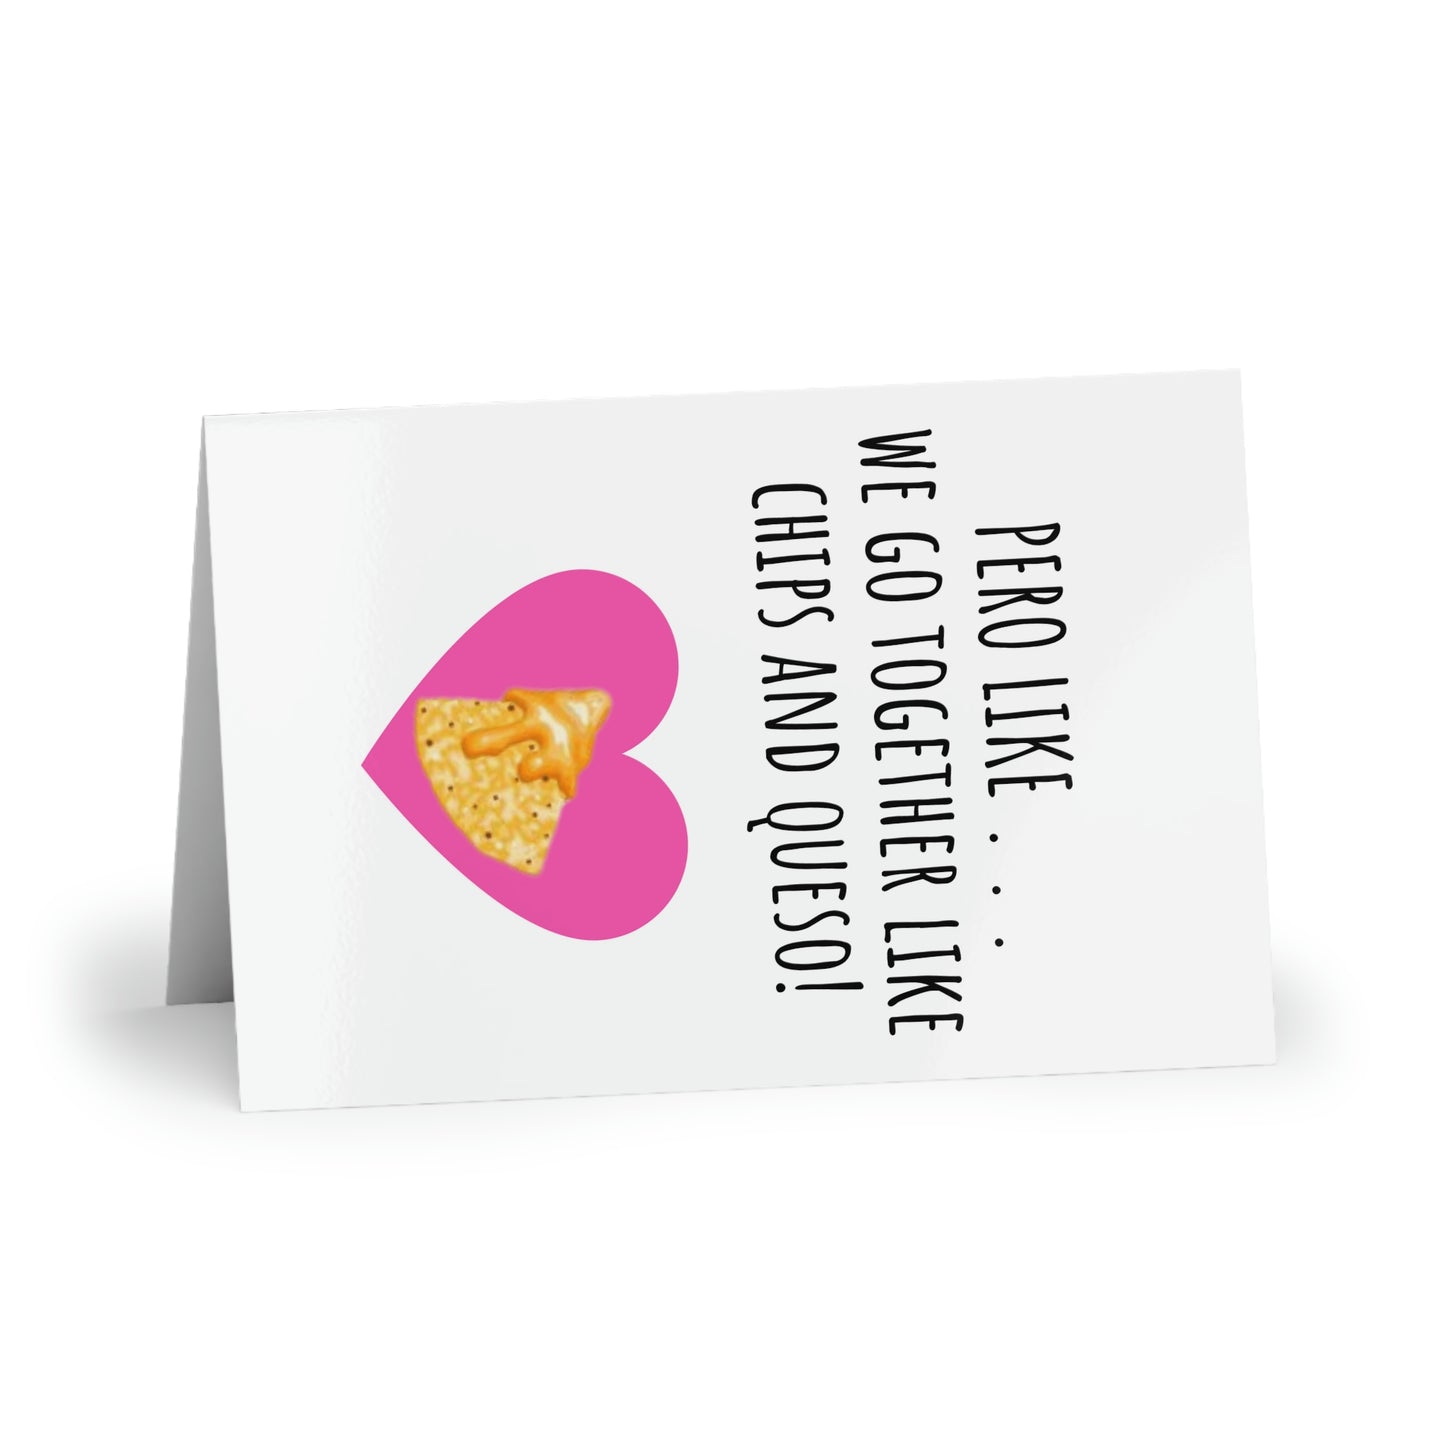 We Go Together Like Chips and Queso Valentines Day Greeting Card